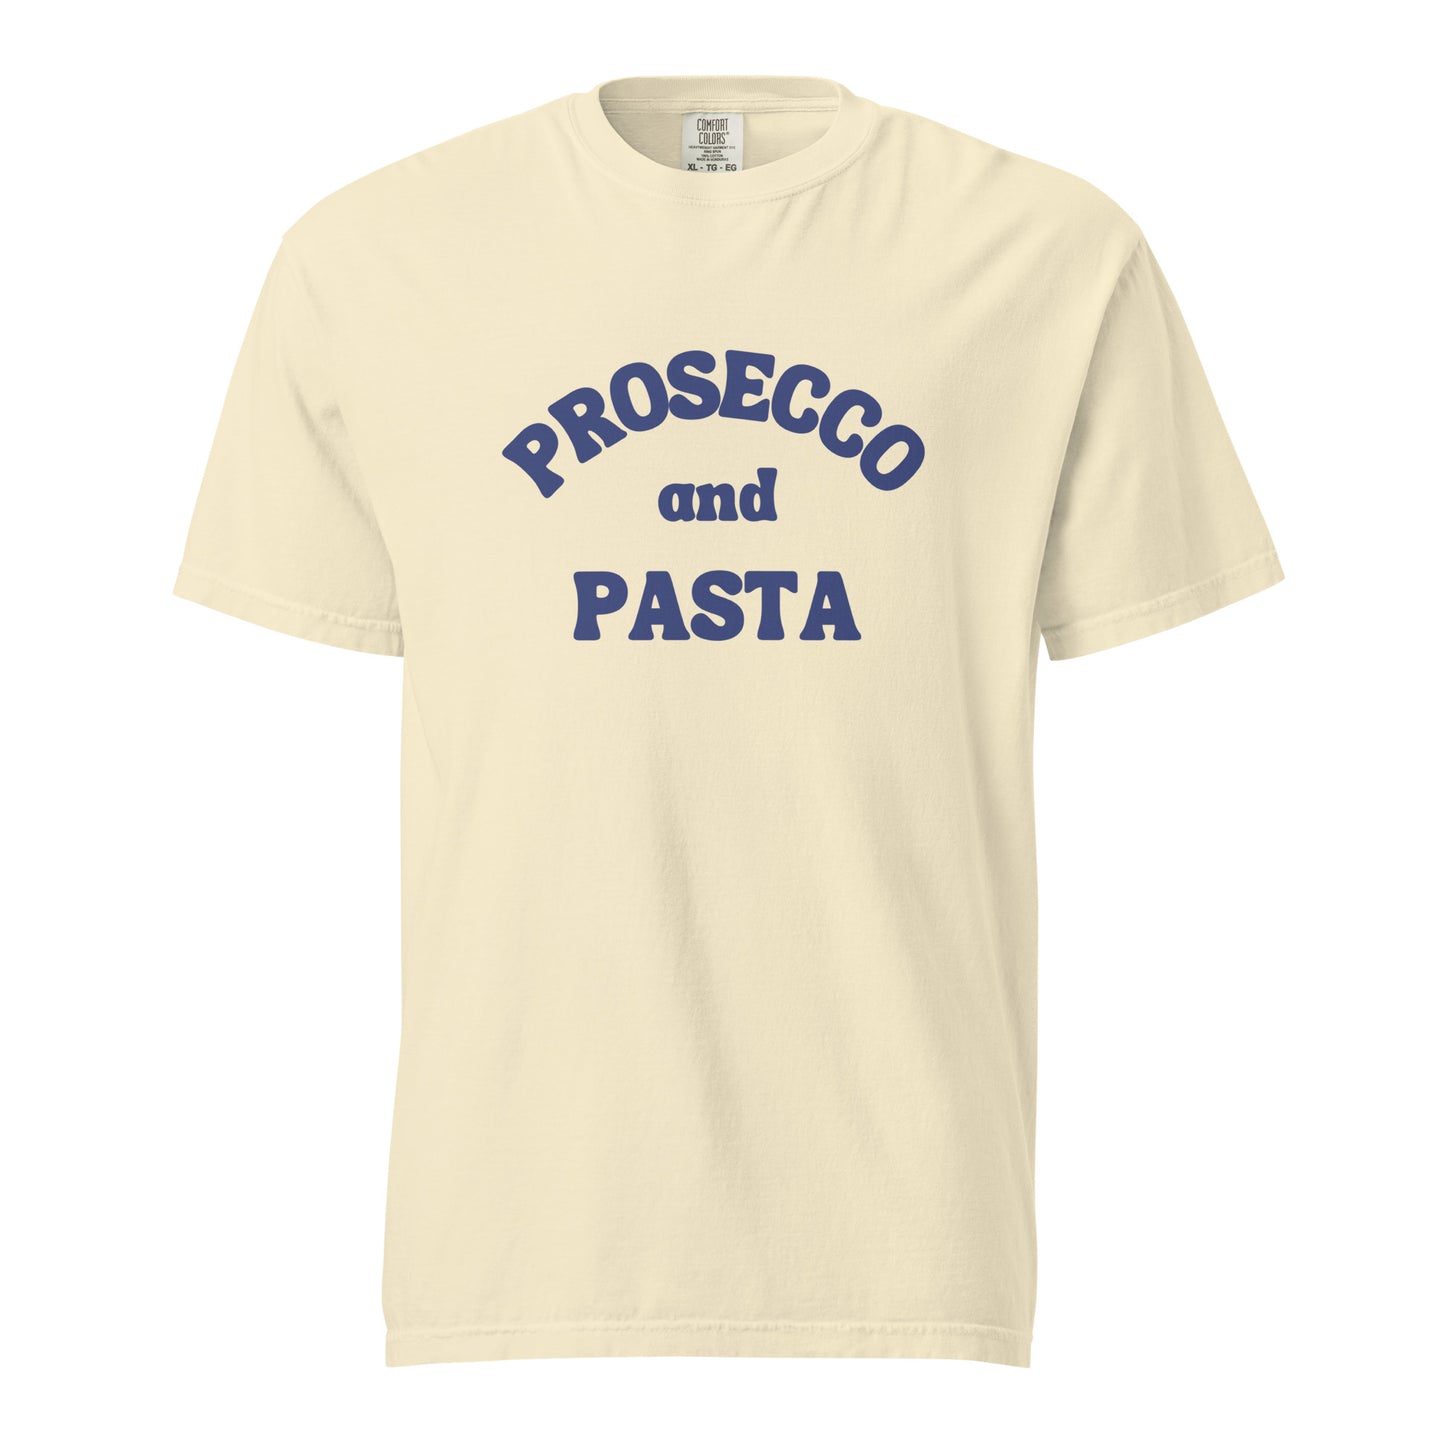 Prosecco and Pasta Tee